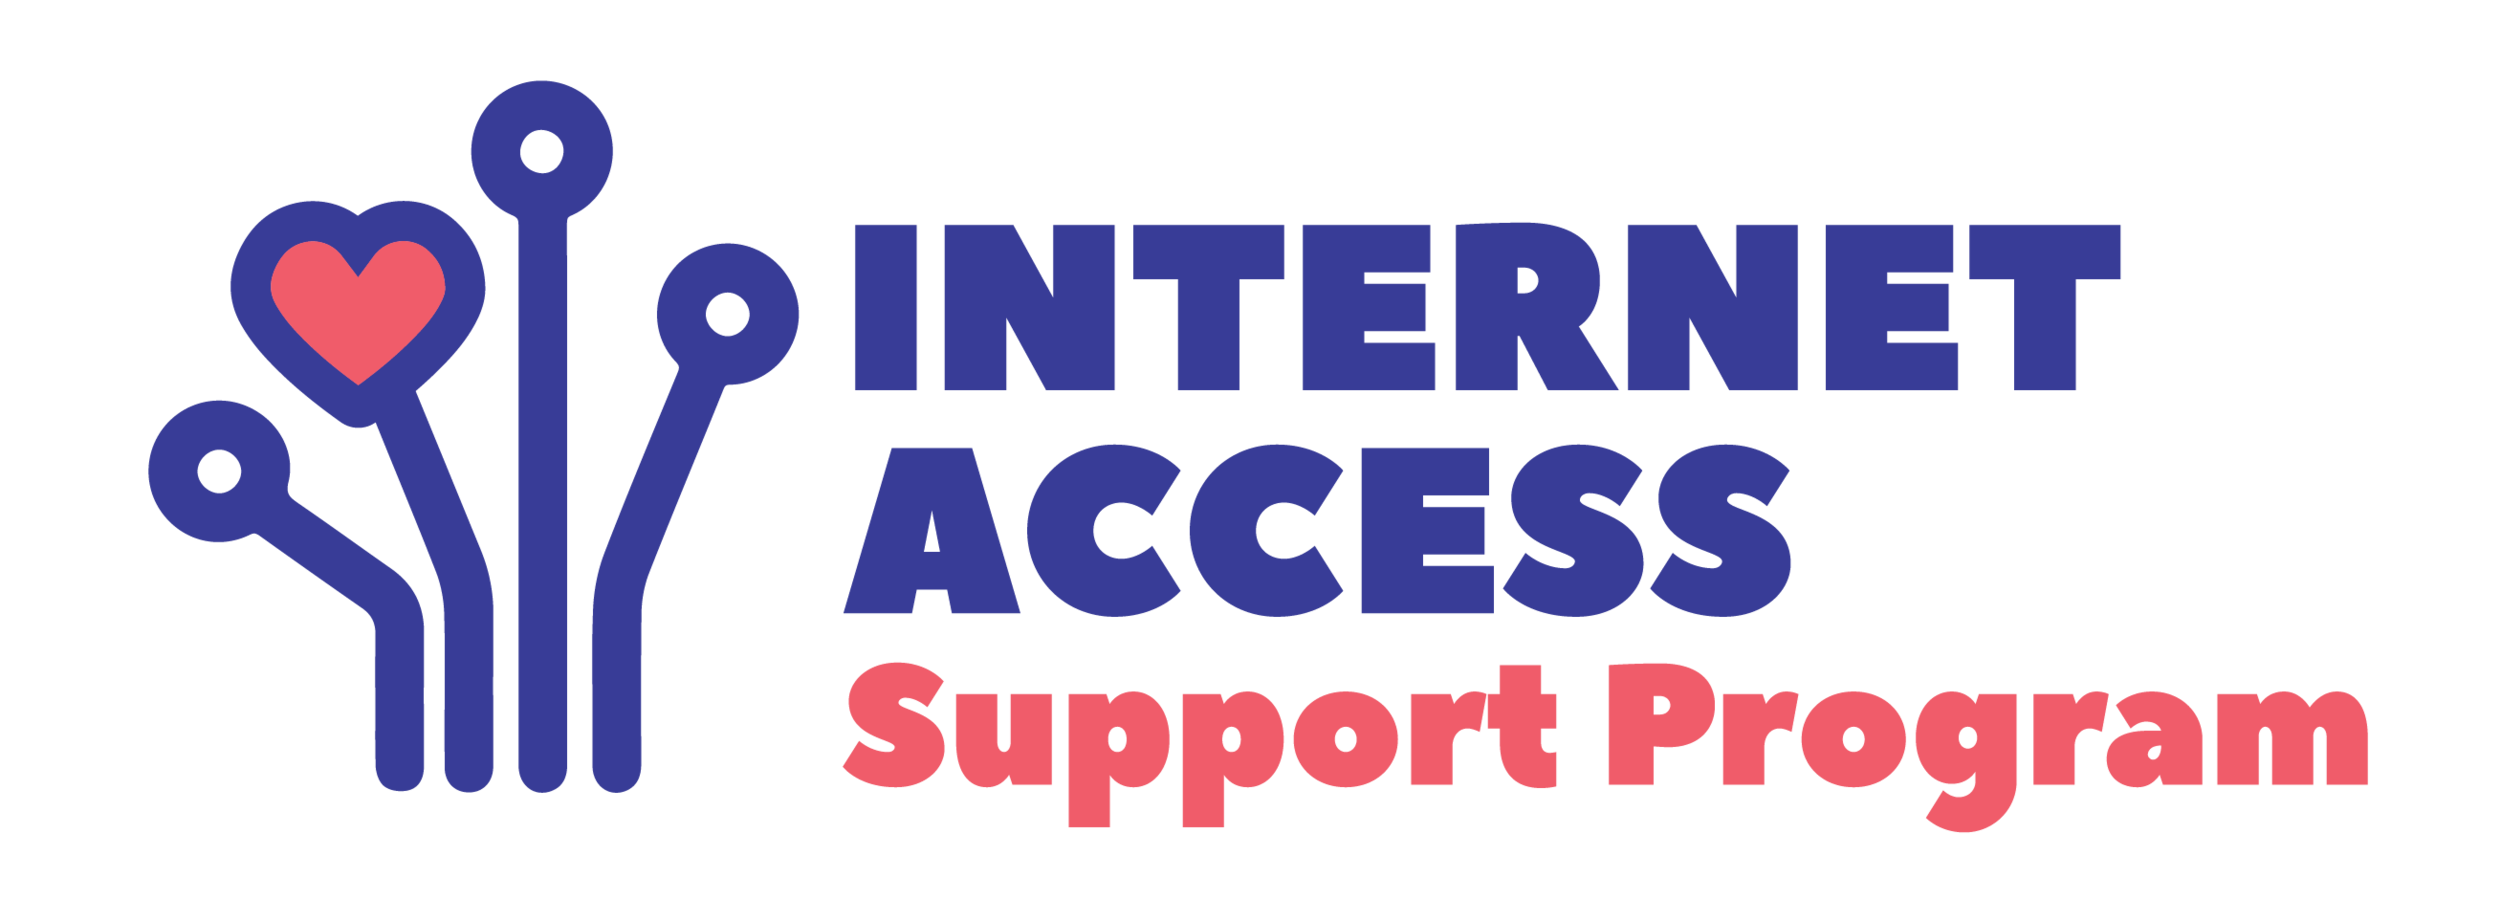 Getting Connected - Internet Access - Online Support Centre